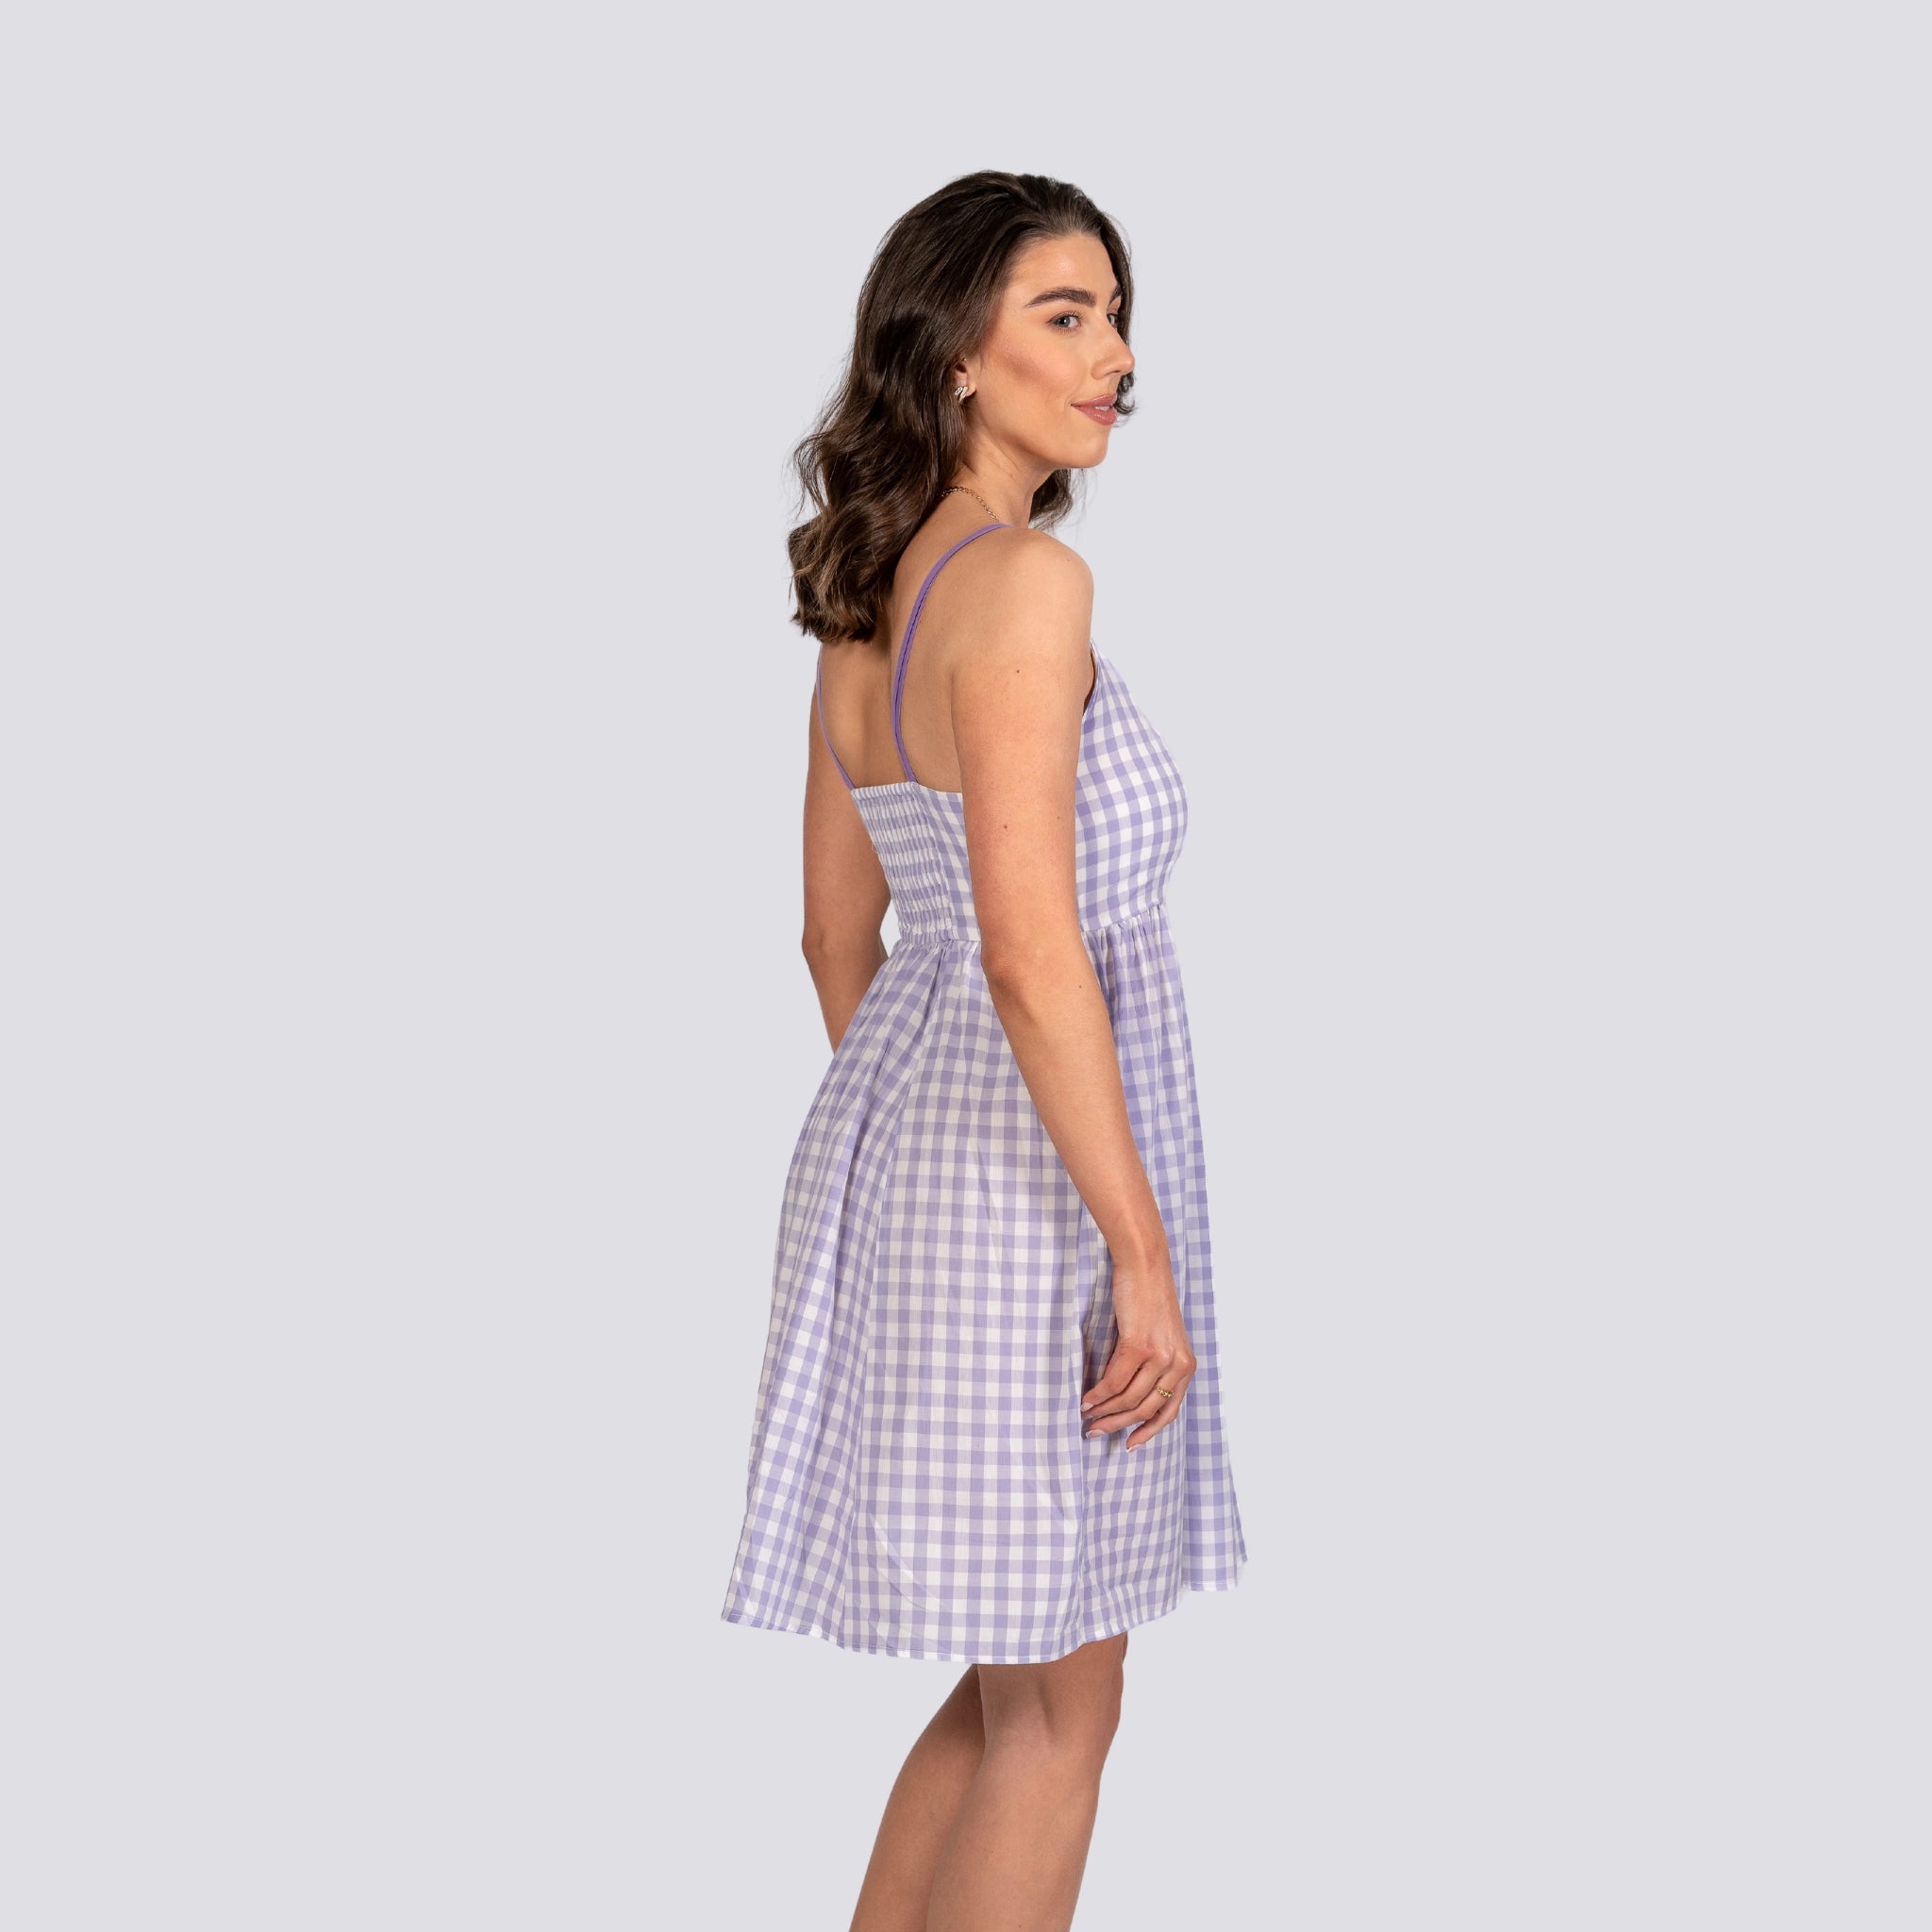 Woman in a Karee Lavender Plaid Cotton Mini Dress looking over her shoulder, standing against a light gray background.